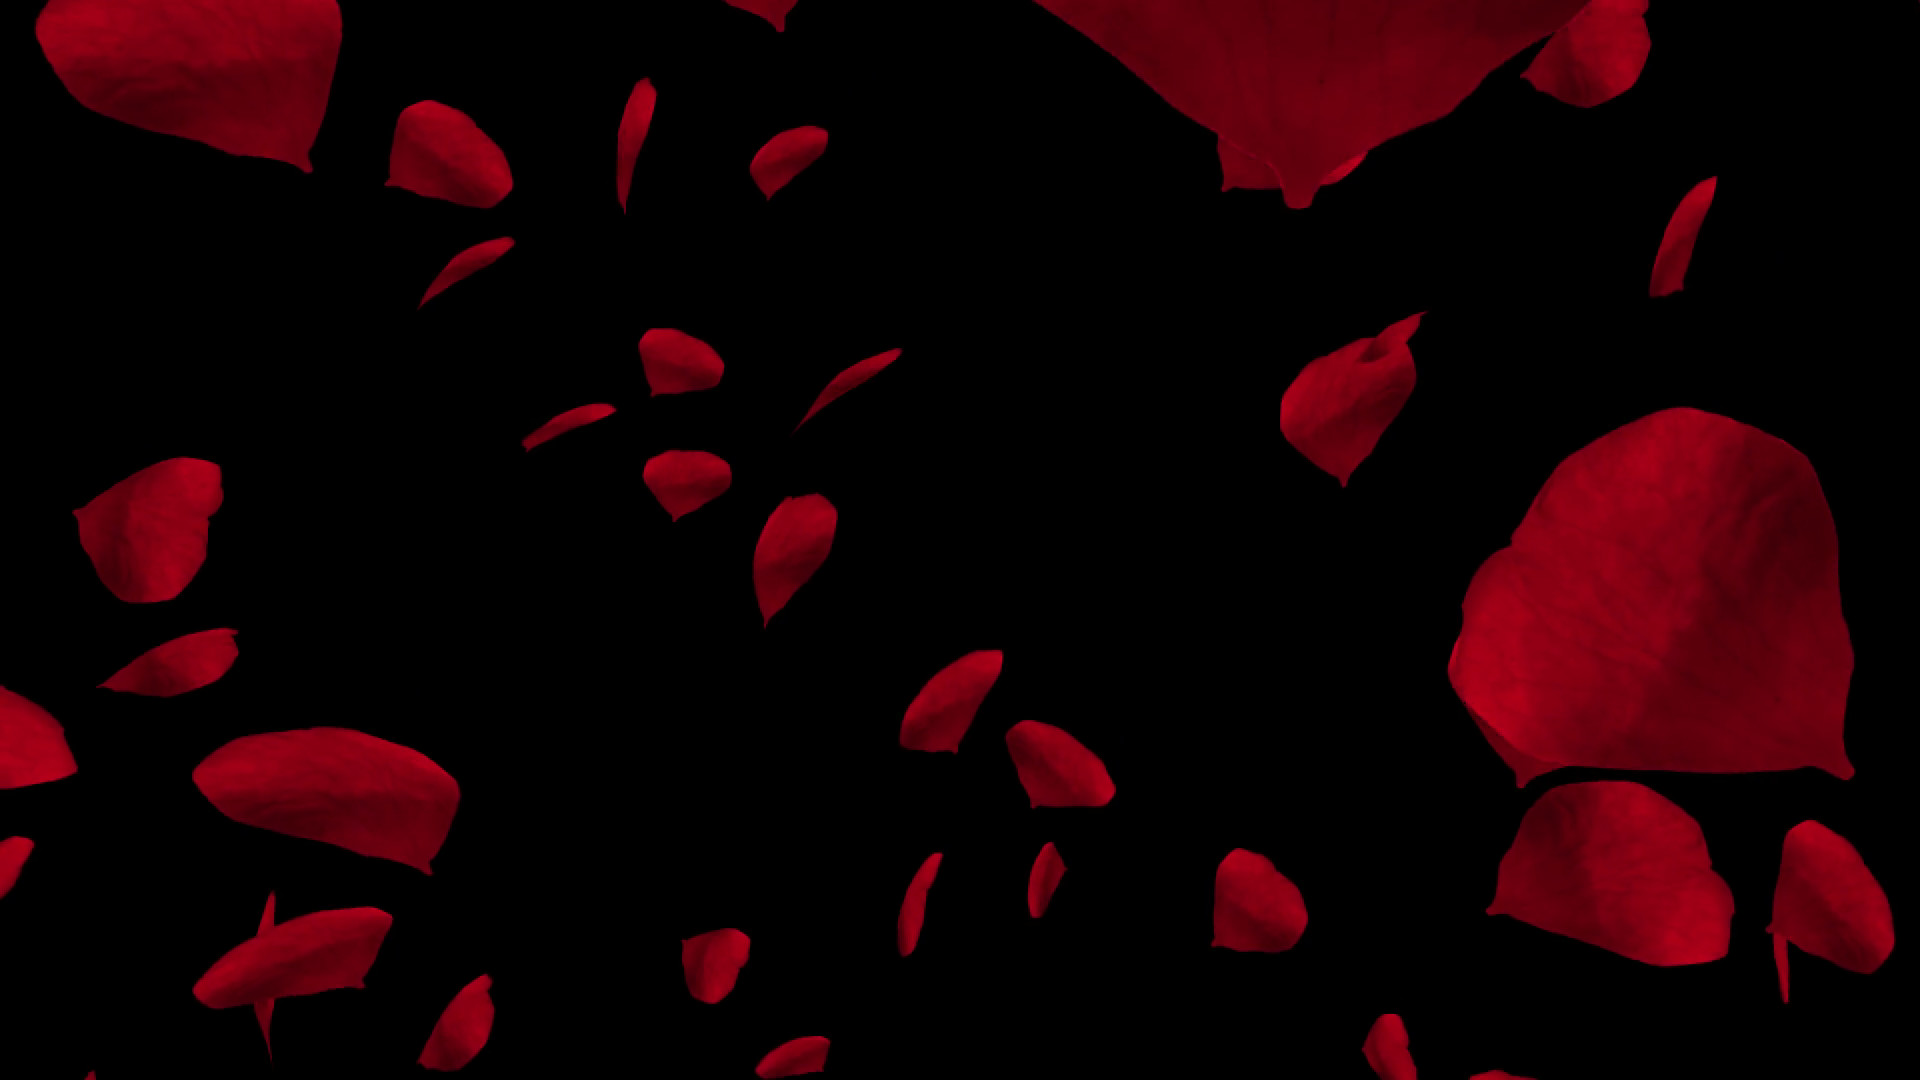 1920x1080 Falling red rose petals. Valentine slow motion HD animation, close up with black  background